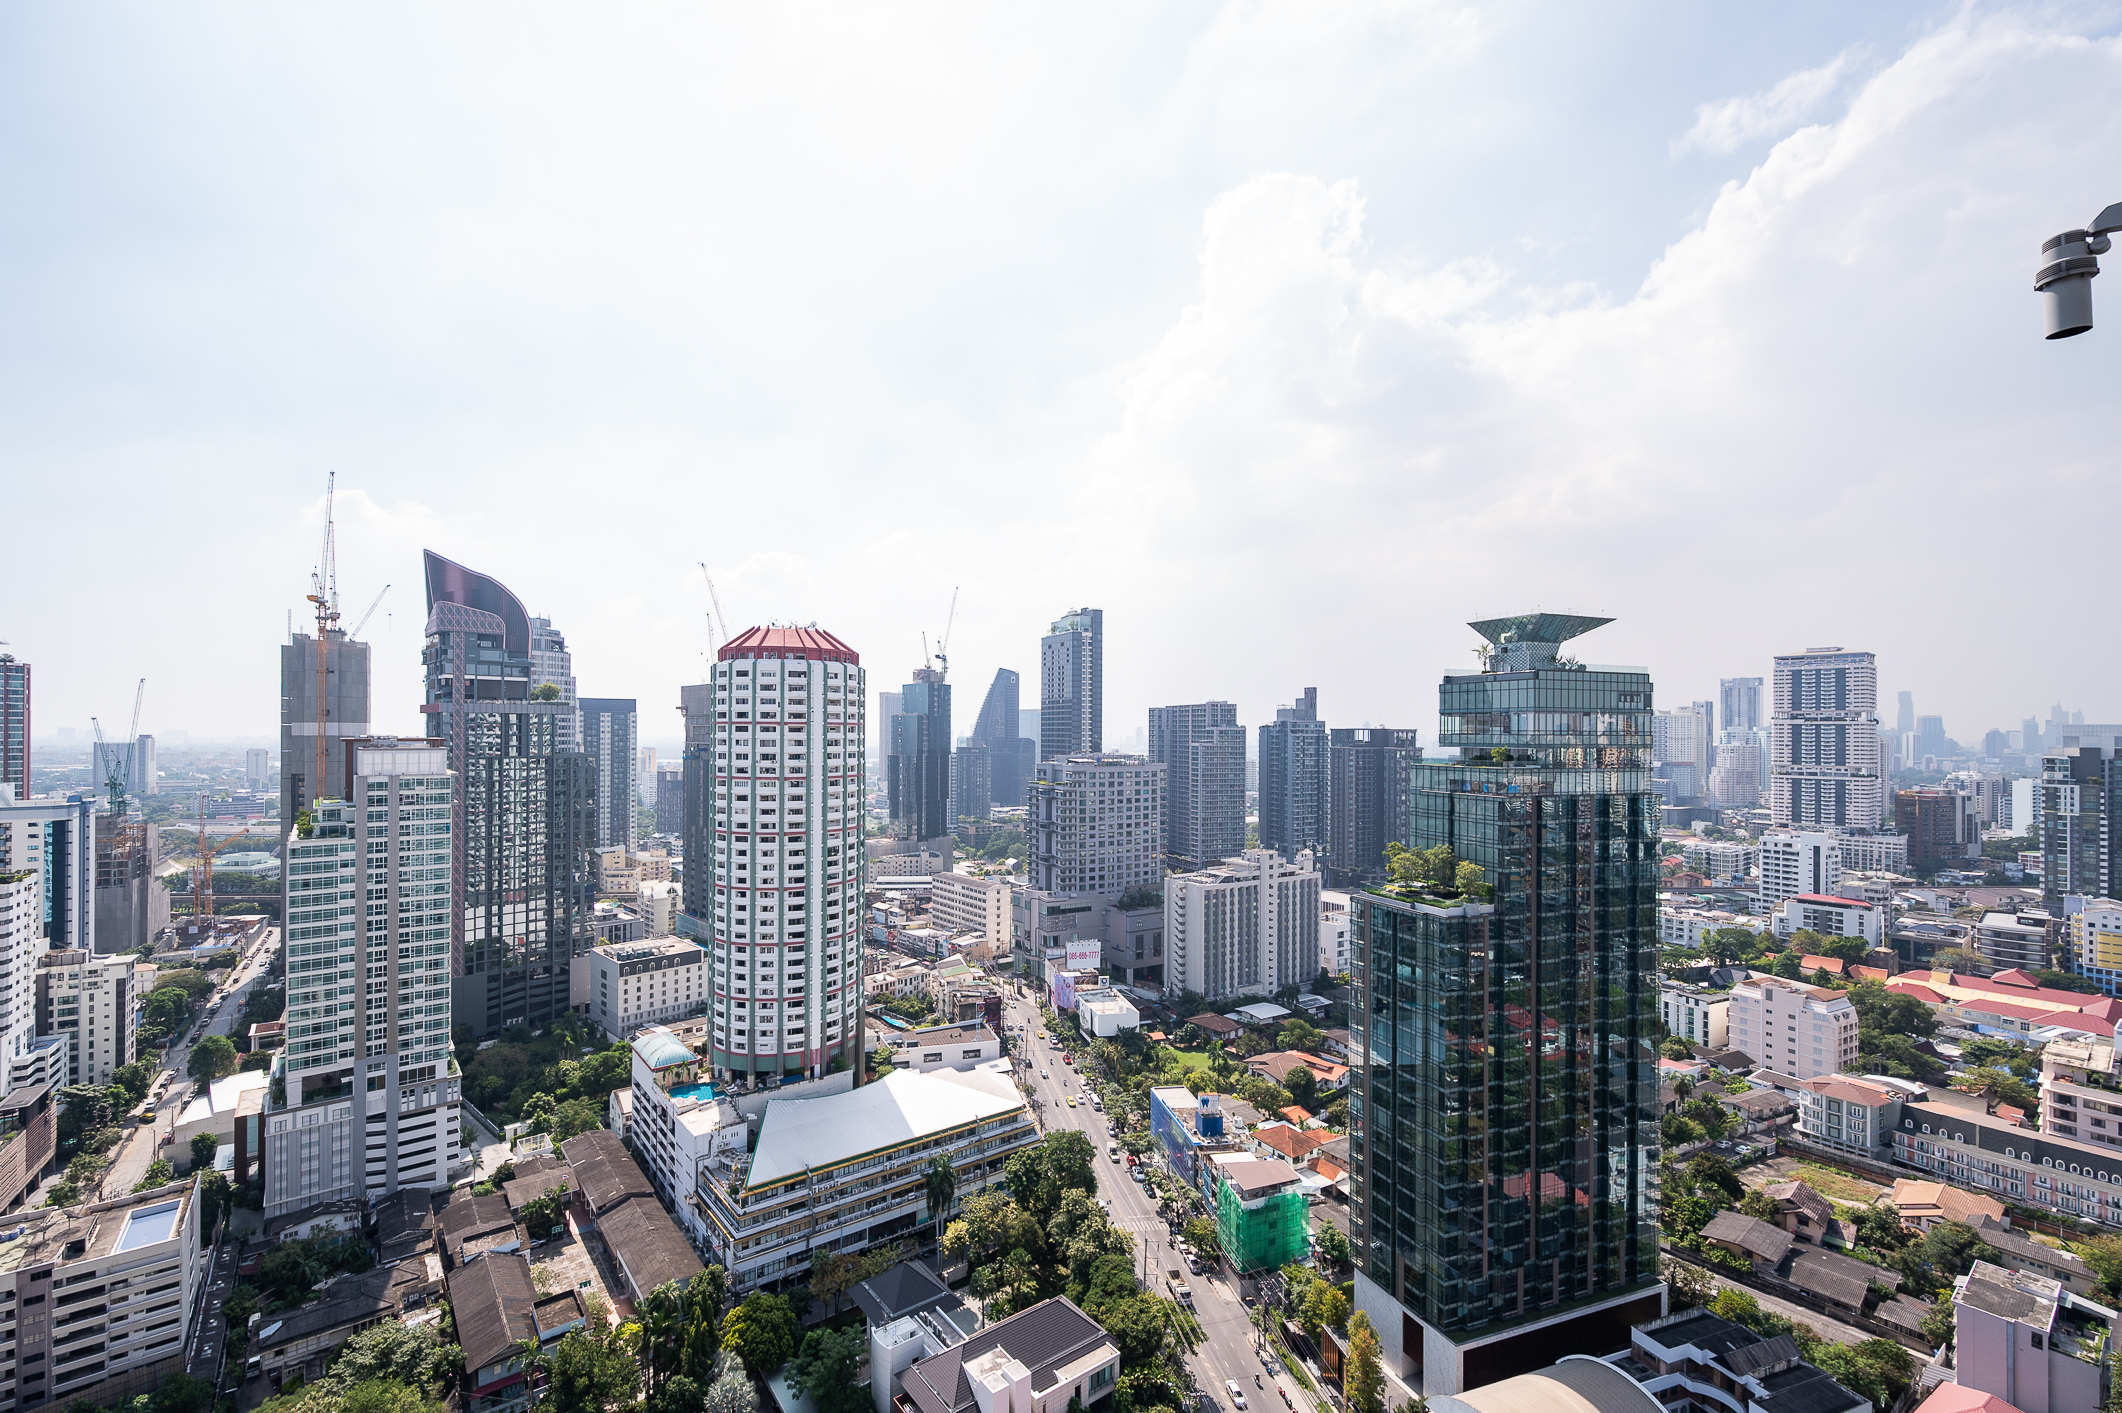 Quattro by Sansiri. Centrally located in the Sukhumvit area, close to BTS Thonglor statio